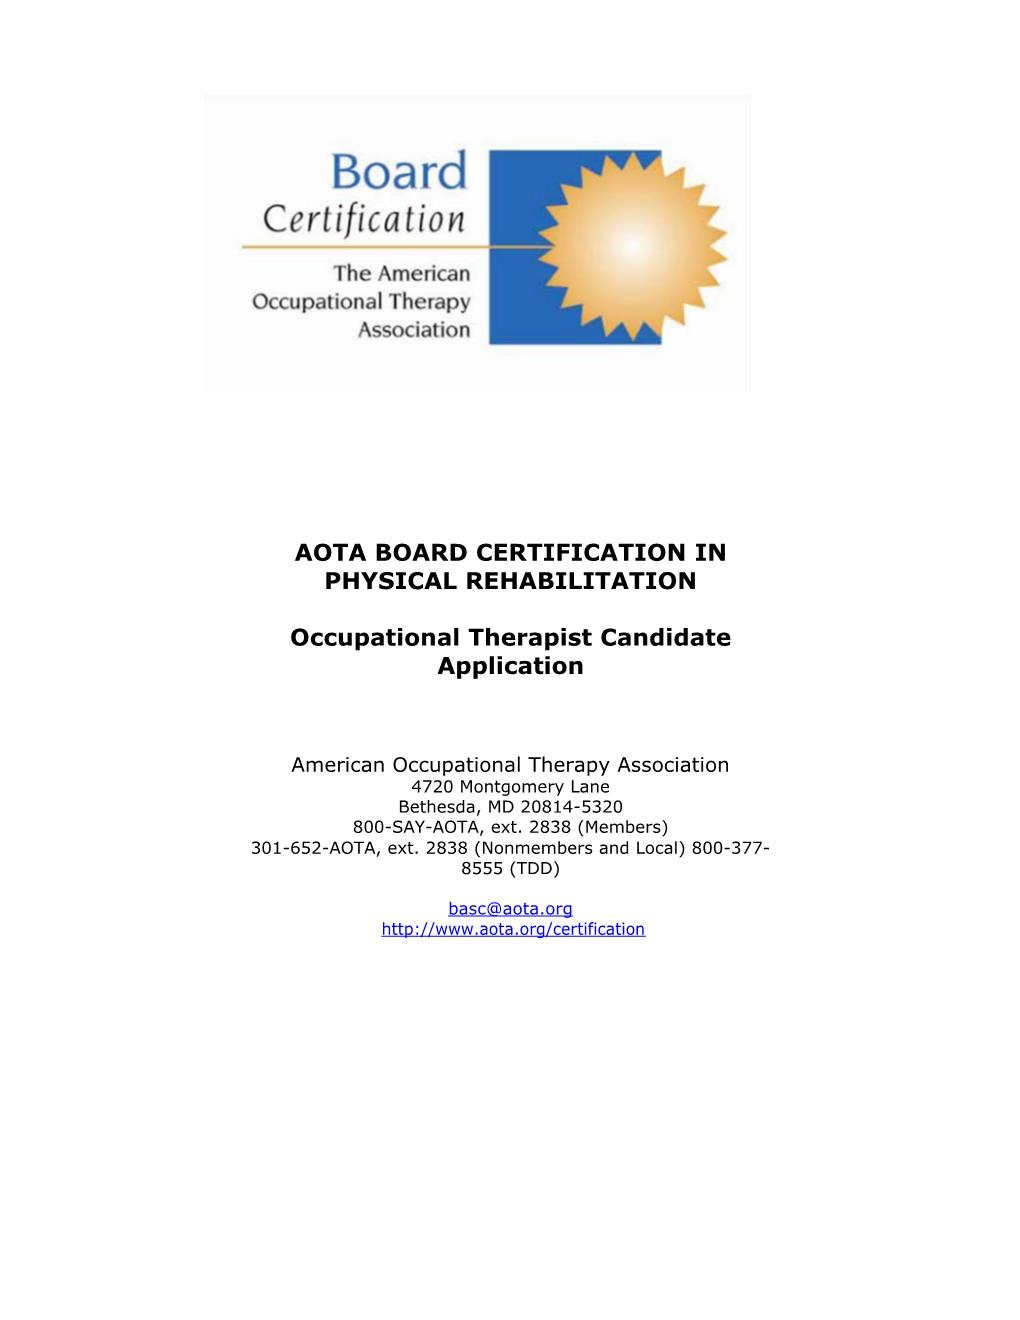 Occupational Therapist Candidate Application